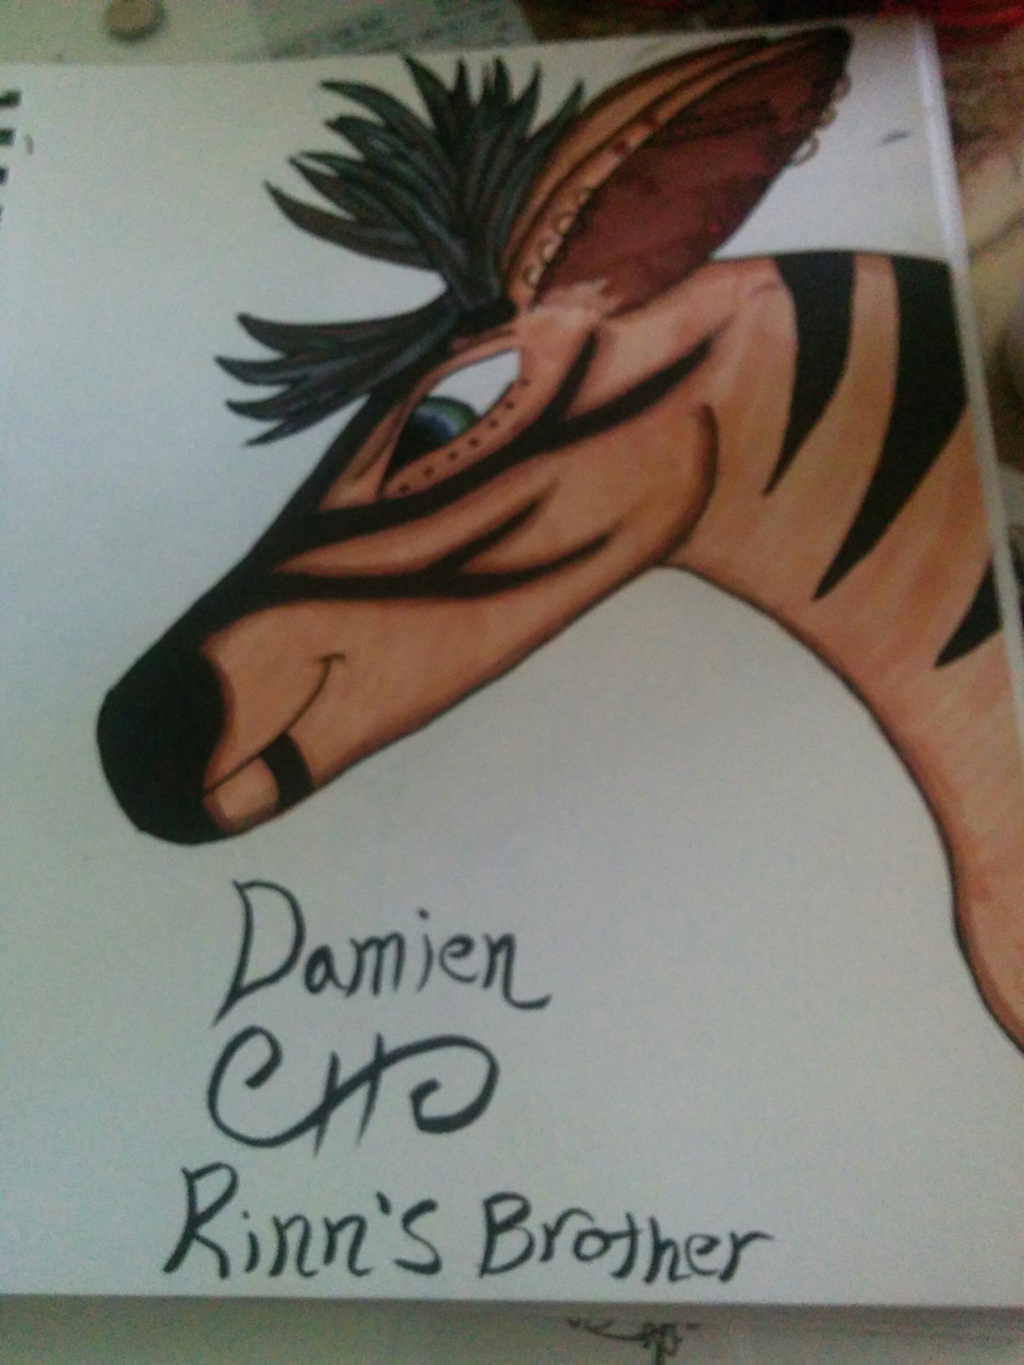 Most recent image: Damien: Rinn's brother